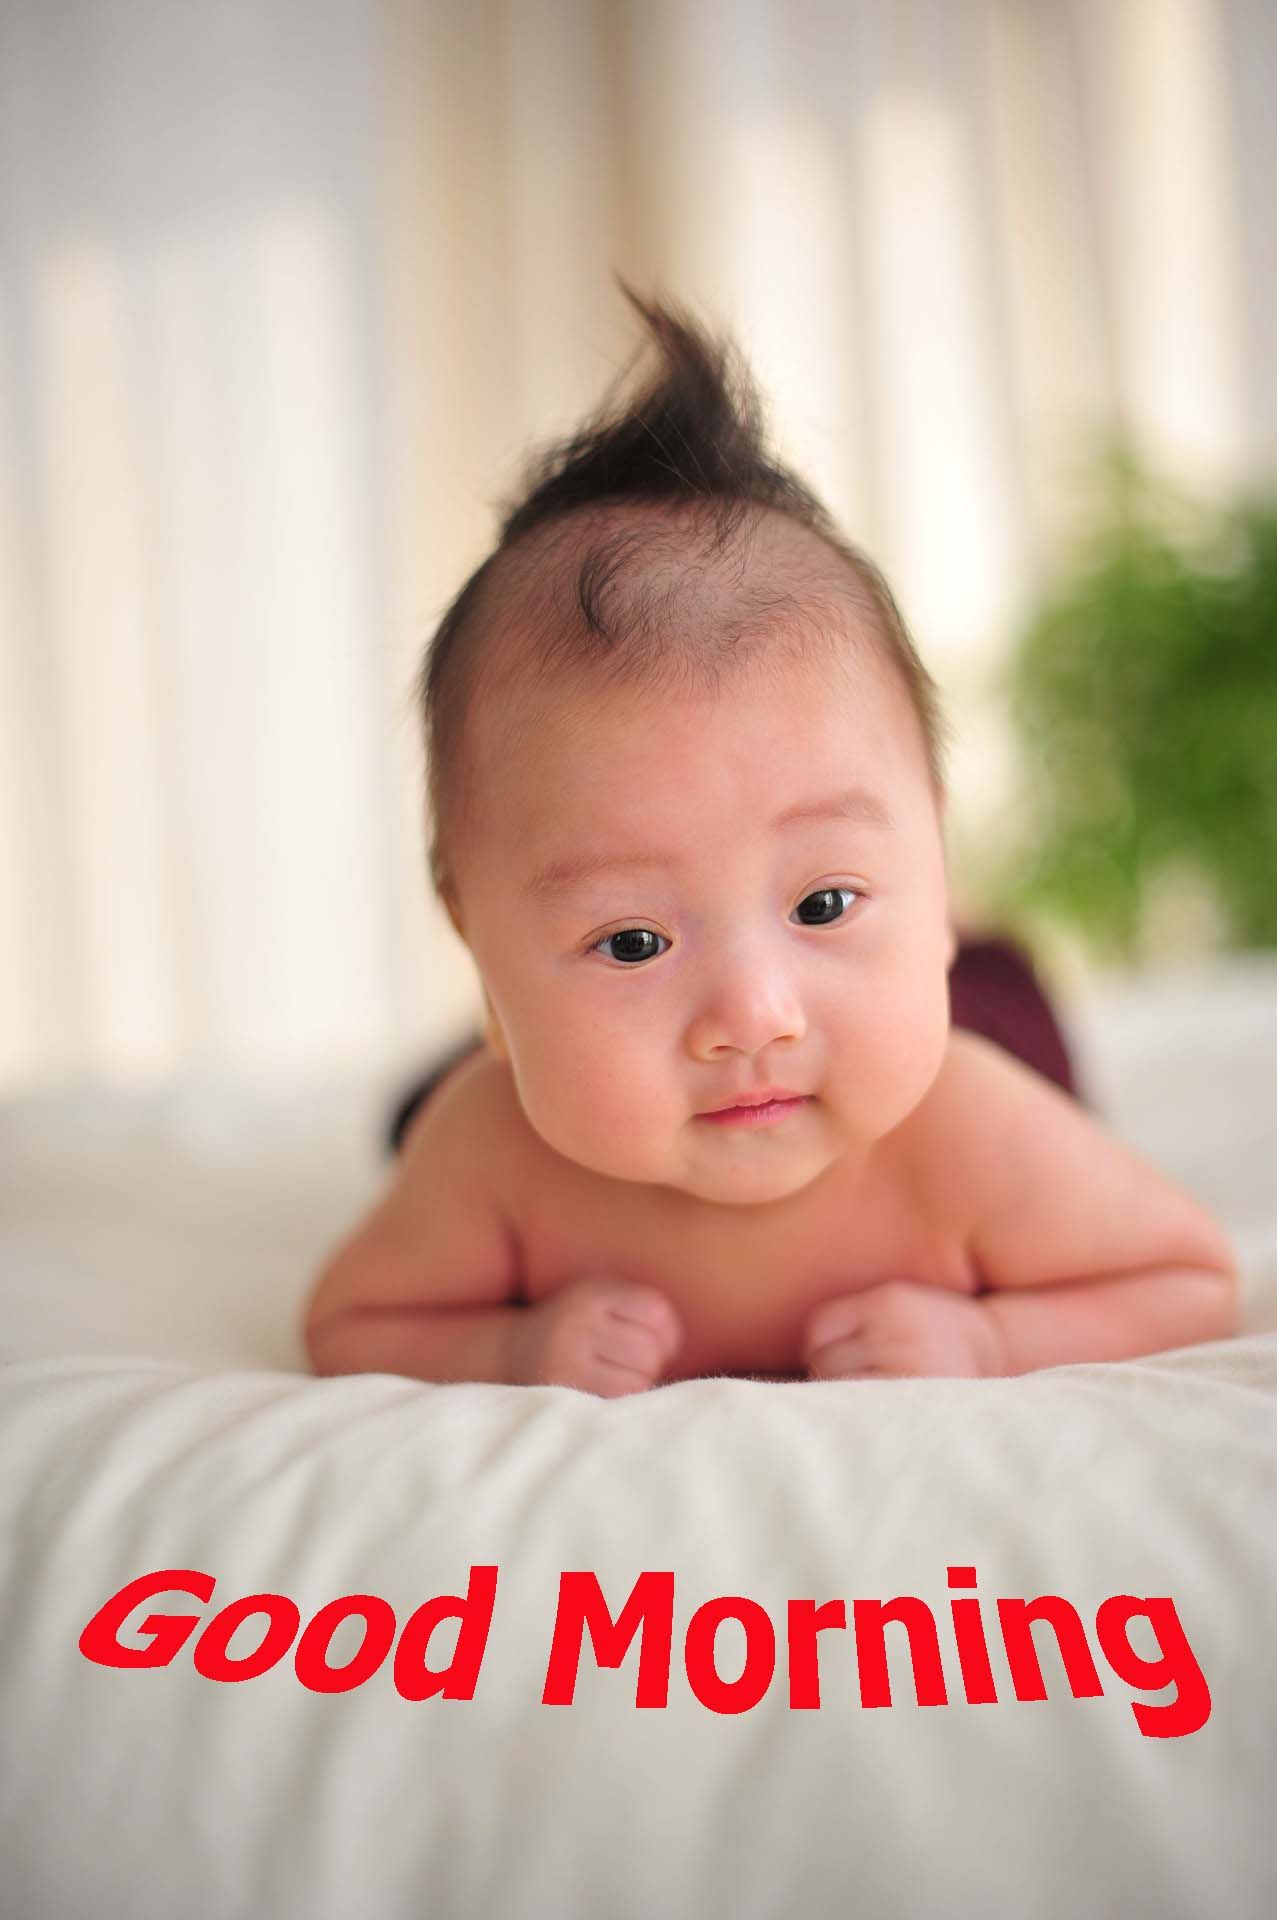 Good Morning Cute Baby Wallpaper For Iphone - Good Morning Wallpaper Baby , HD Wallpaper & Backgrounds